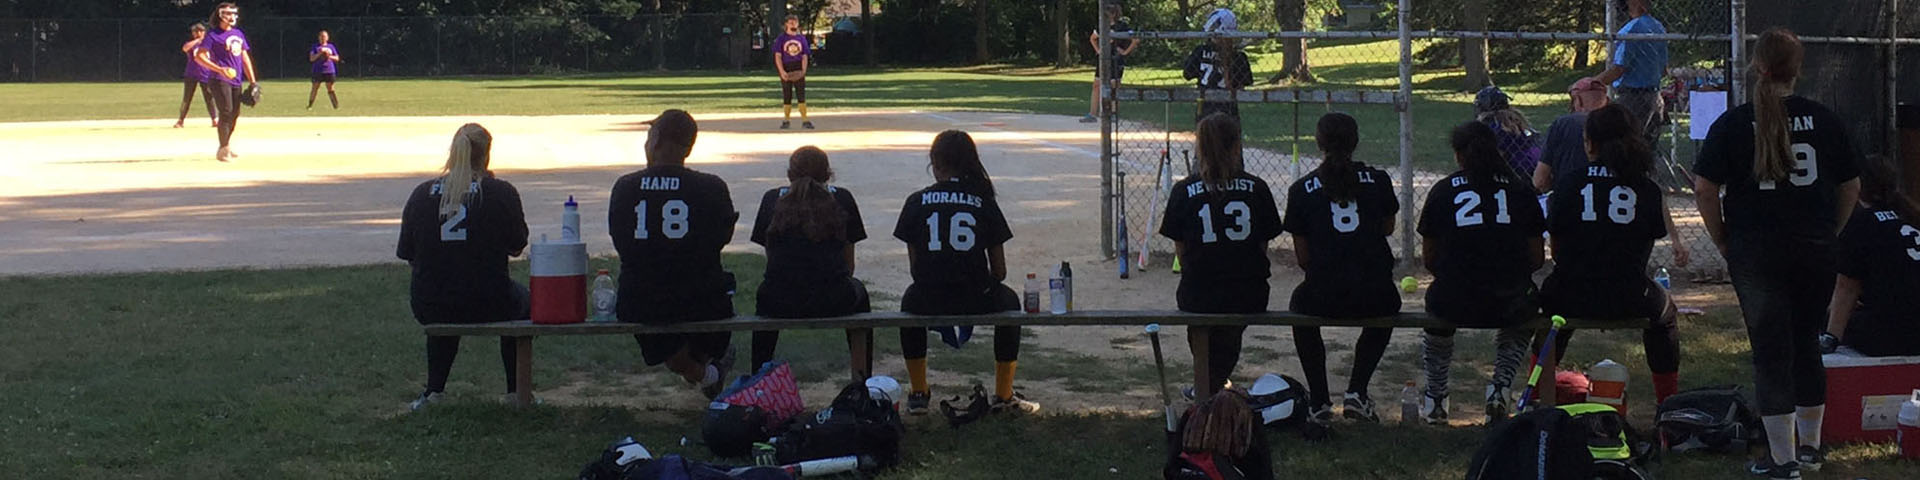 Girls in softball uniforms sitting on a bench.